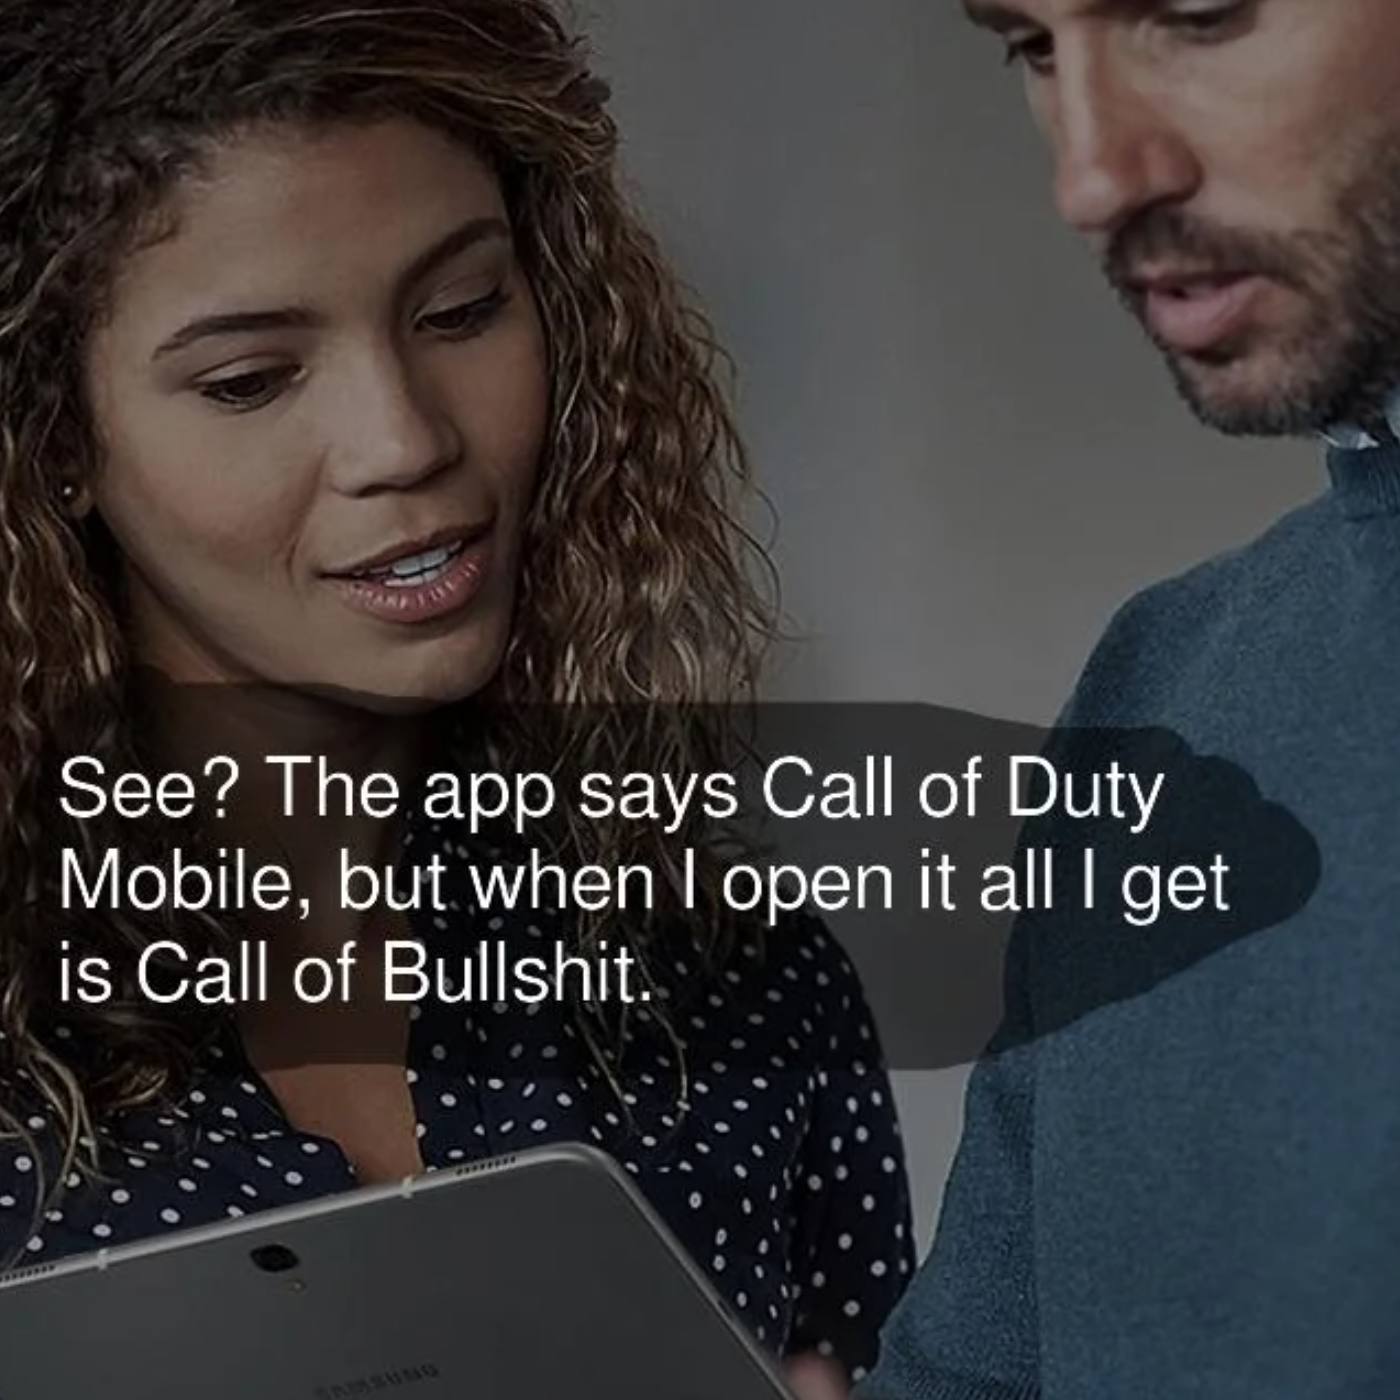 funny gaming memes - basf - See? The app says Call of Duty Mobile, but when I open it all I get is Call of Bullshit.